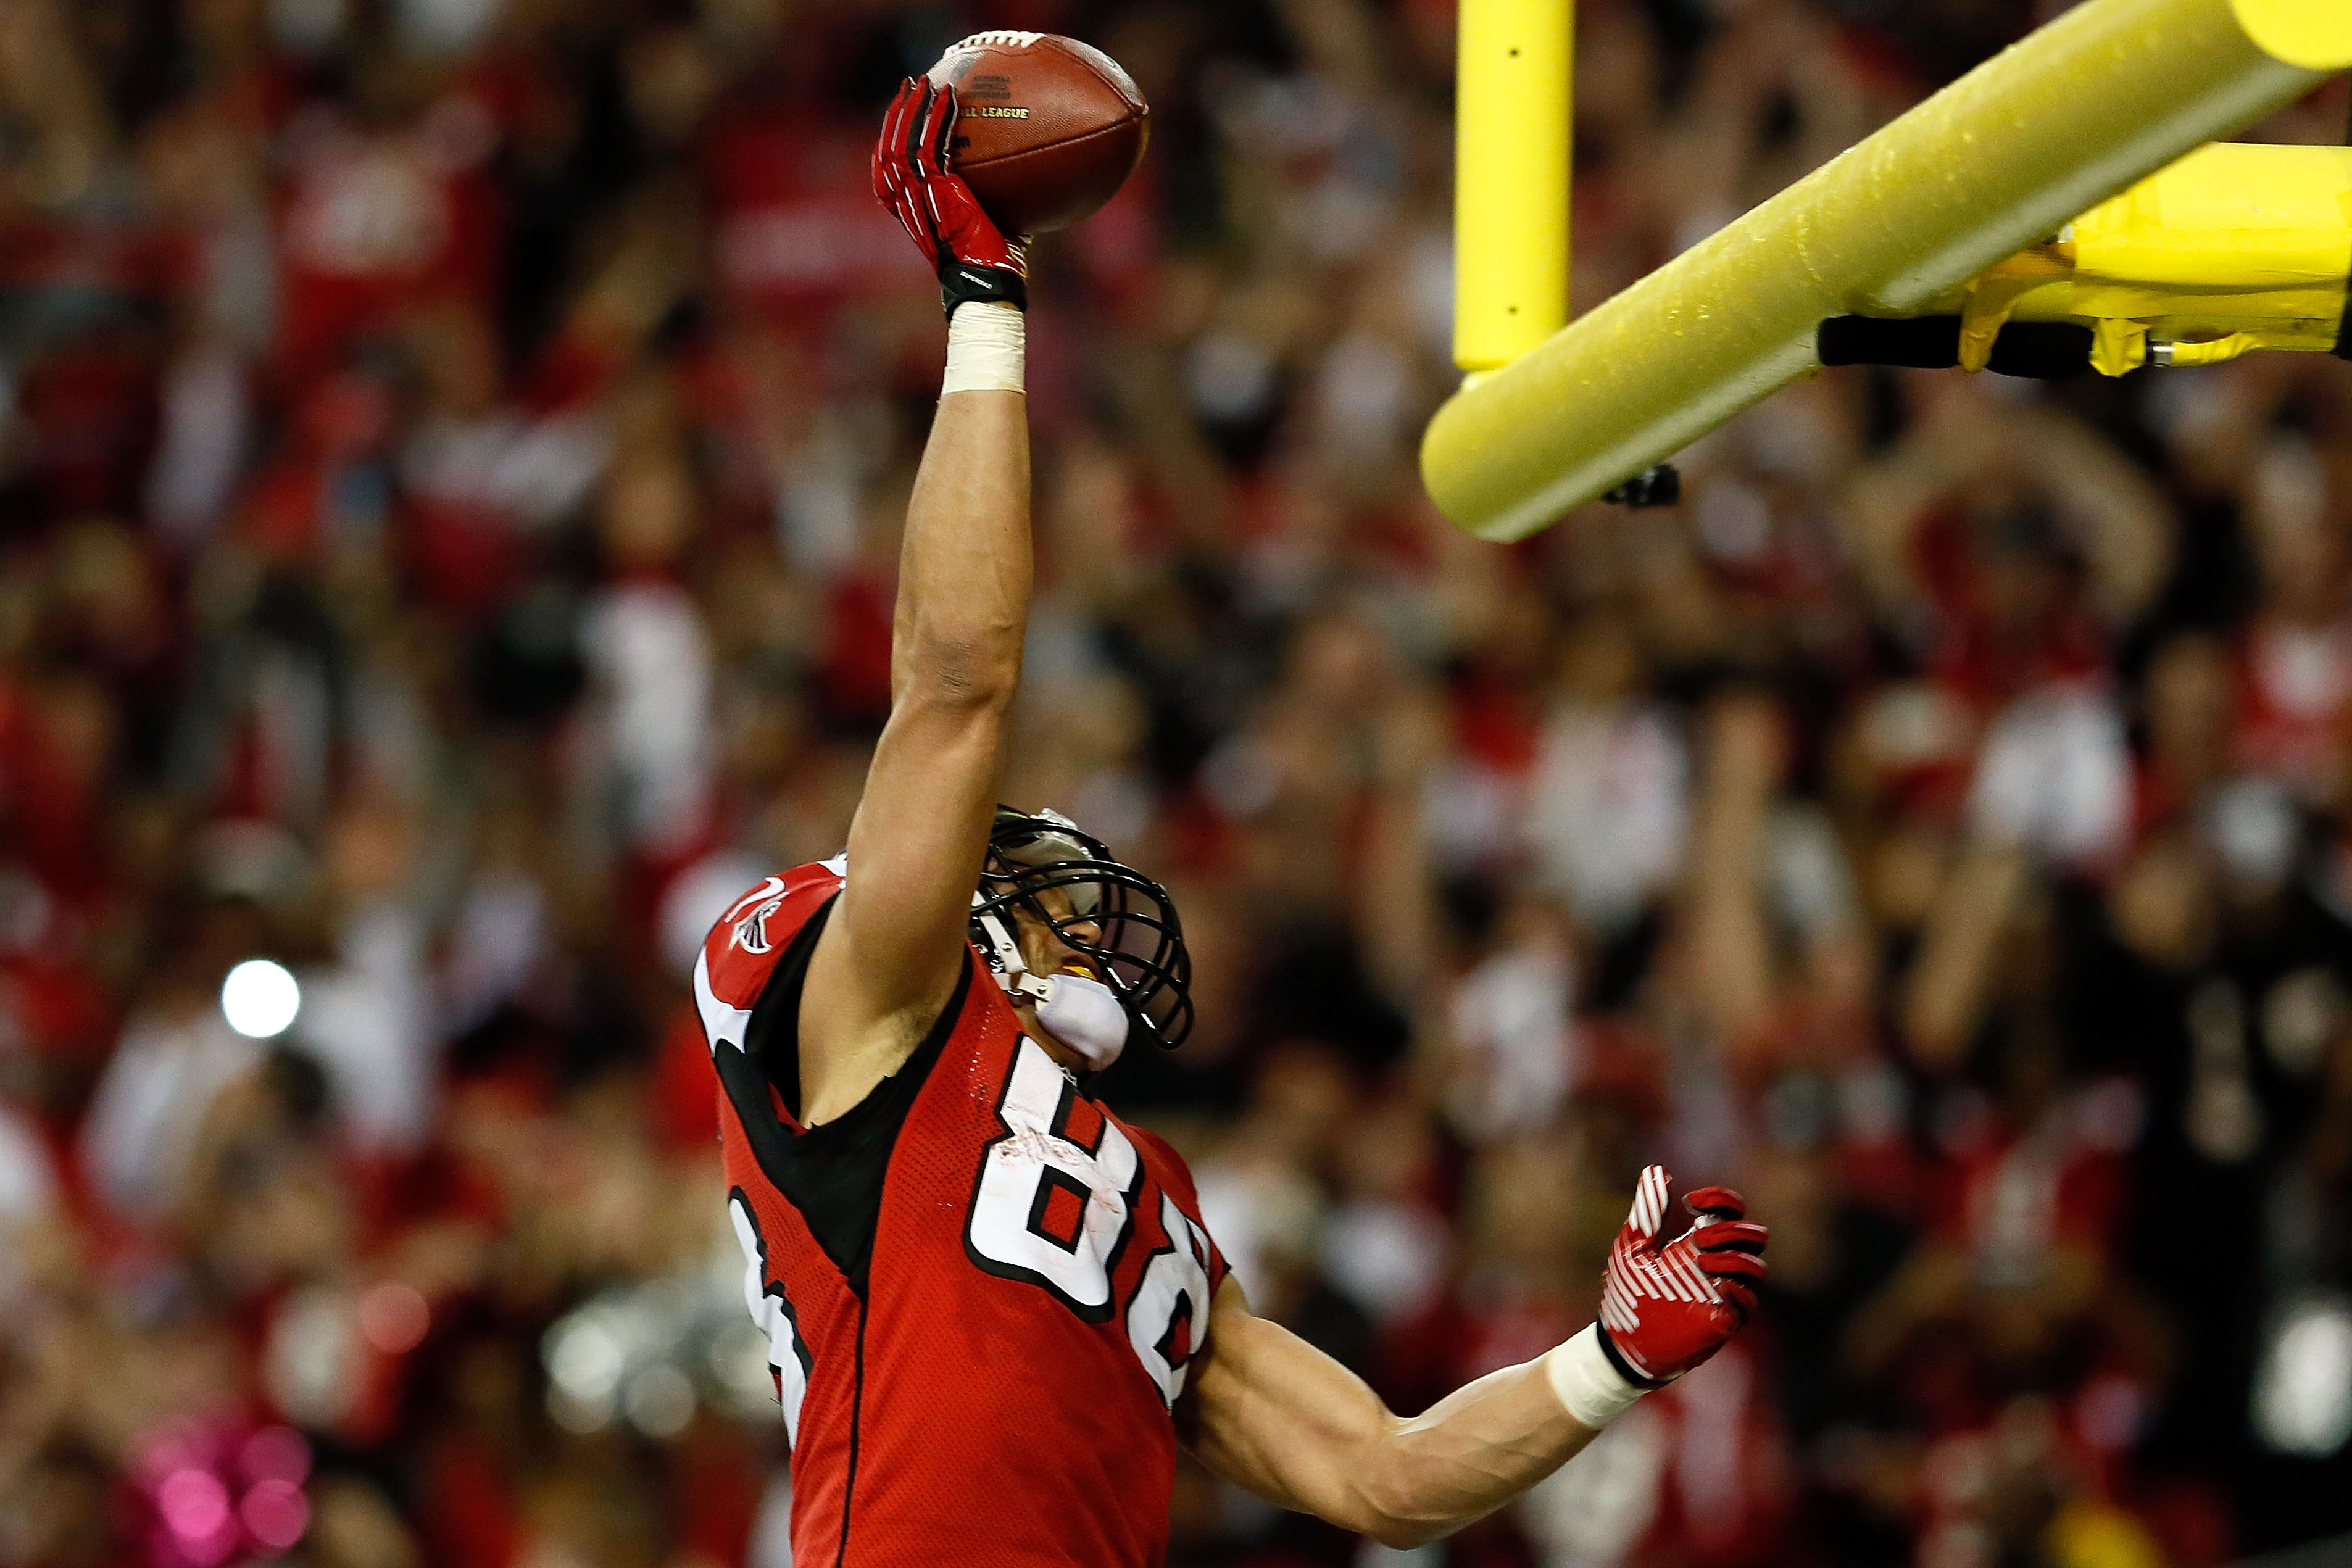 Tight end Tony Gonzalez of the Atlanta Falcons dunks the ball over the goal post